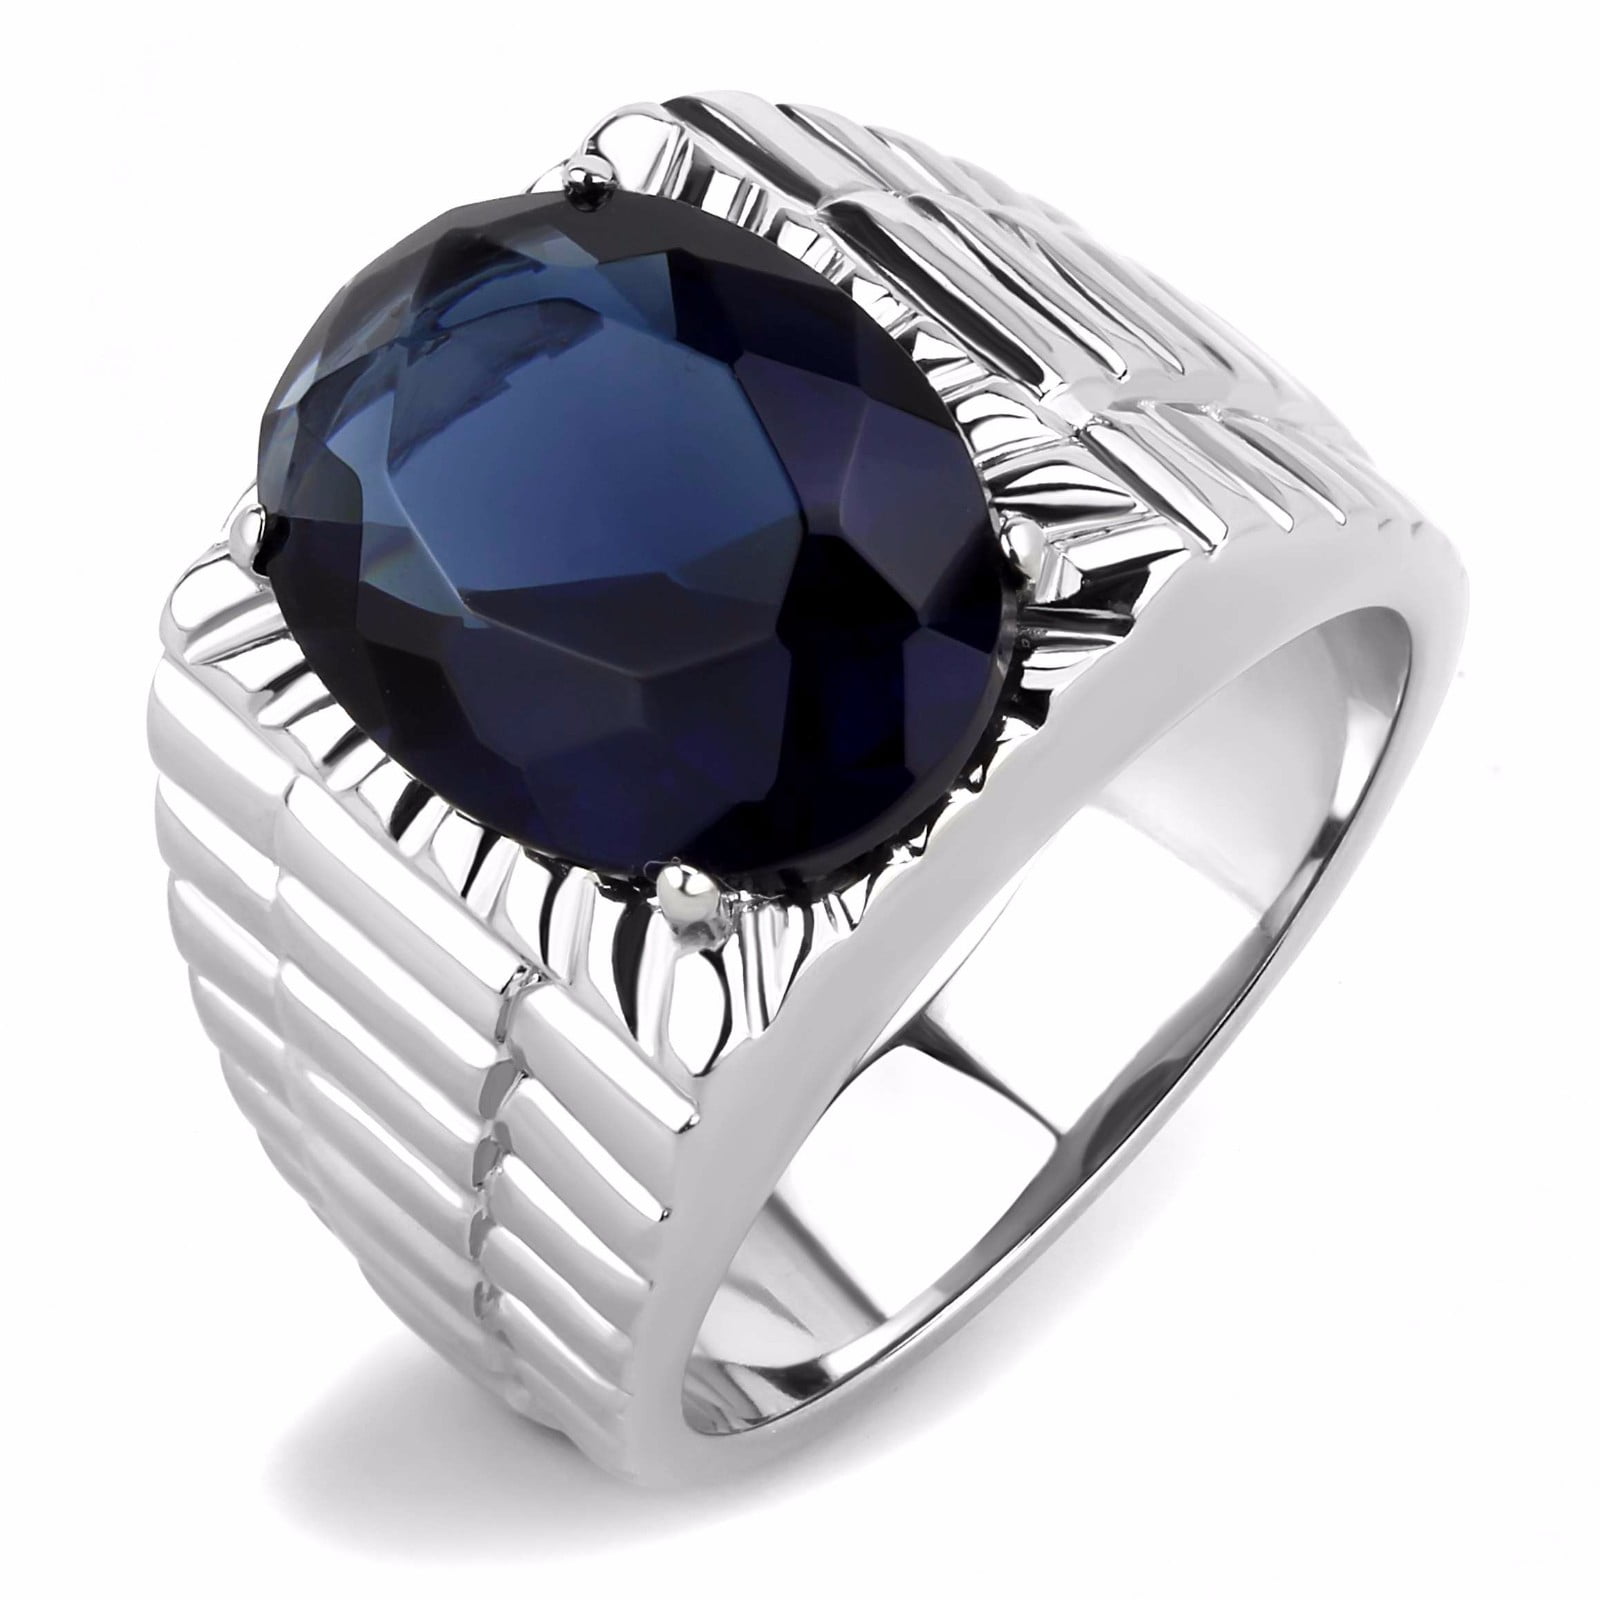 YAZILIND Platinum Plated Band Ring Water-Drop Shape Blue Cubic Zirconia Party Jewelry Women Birthday Gift